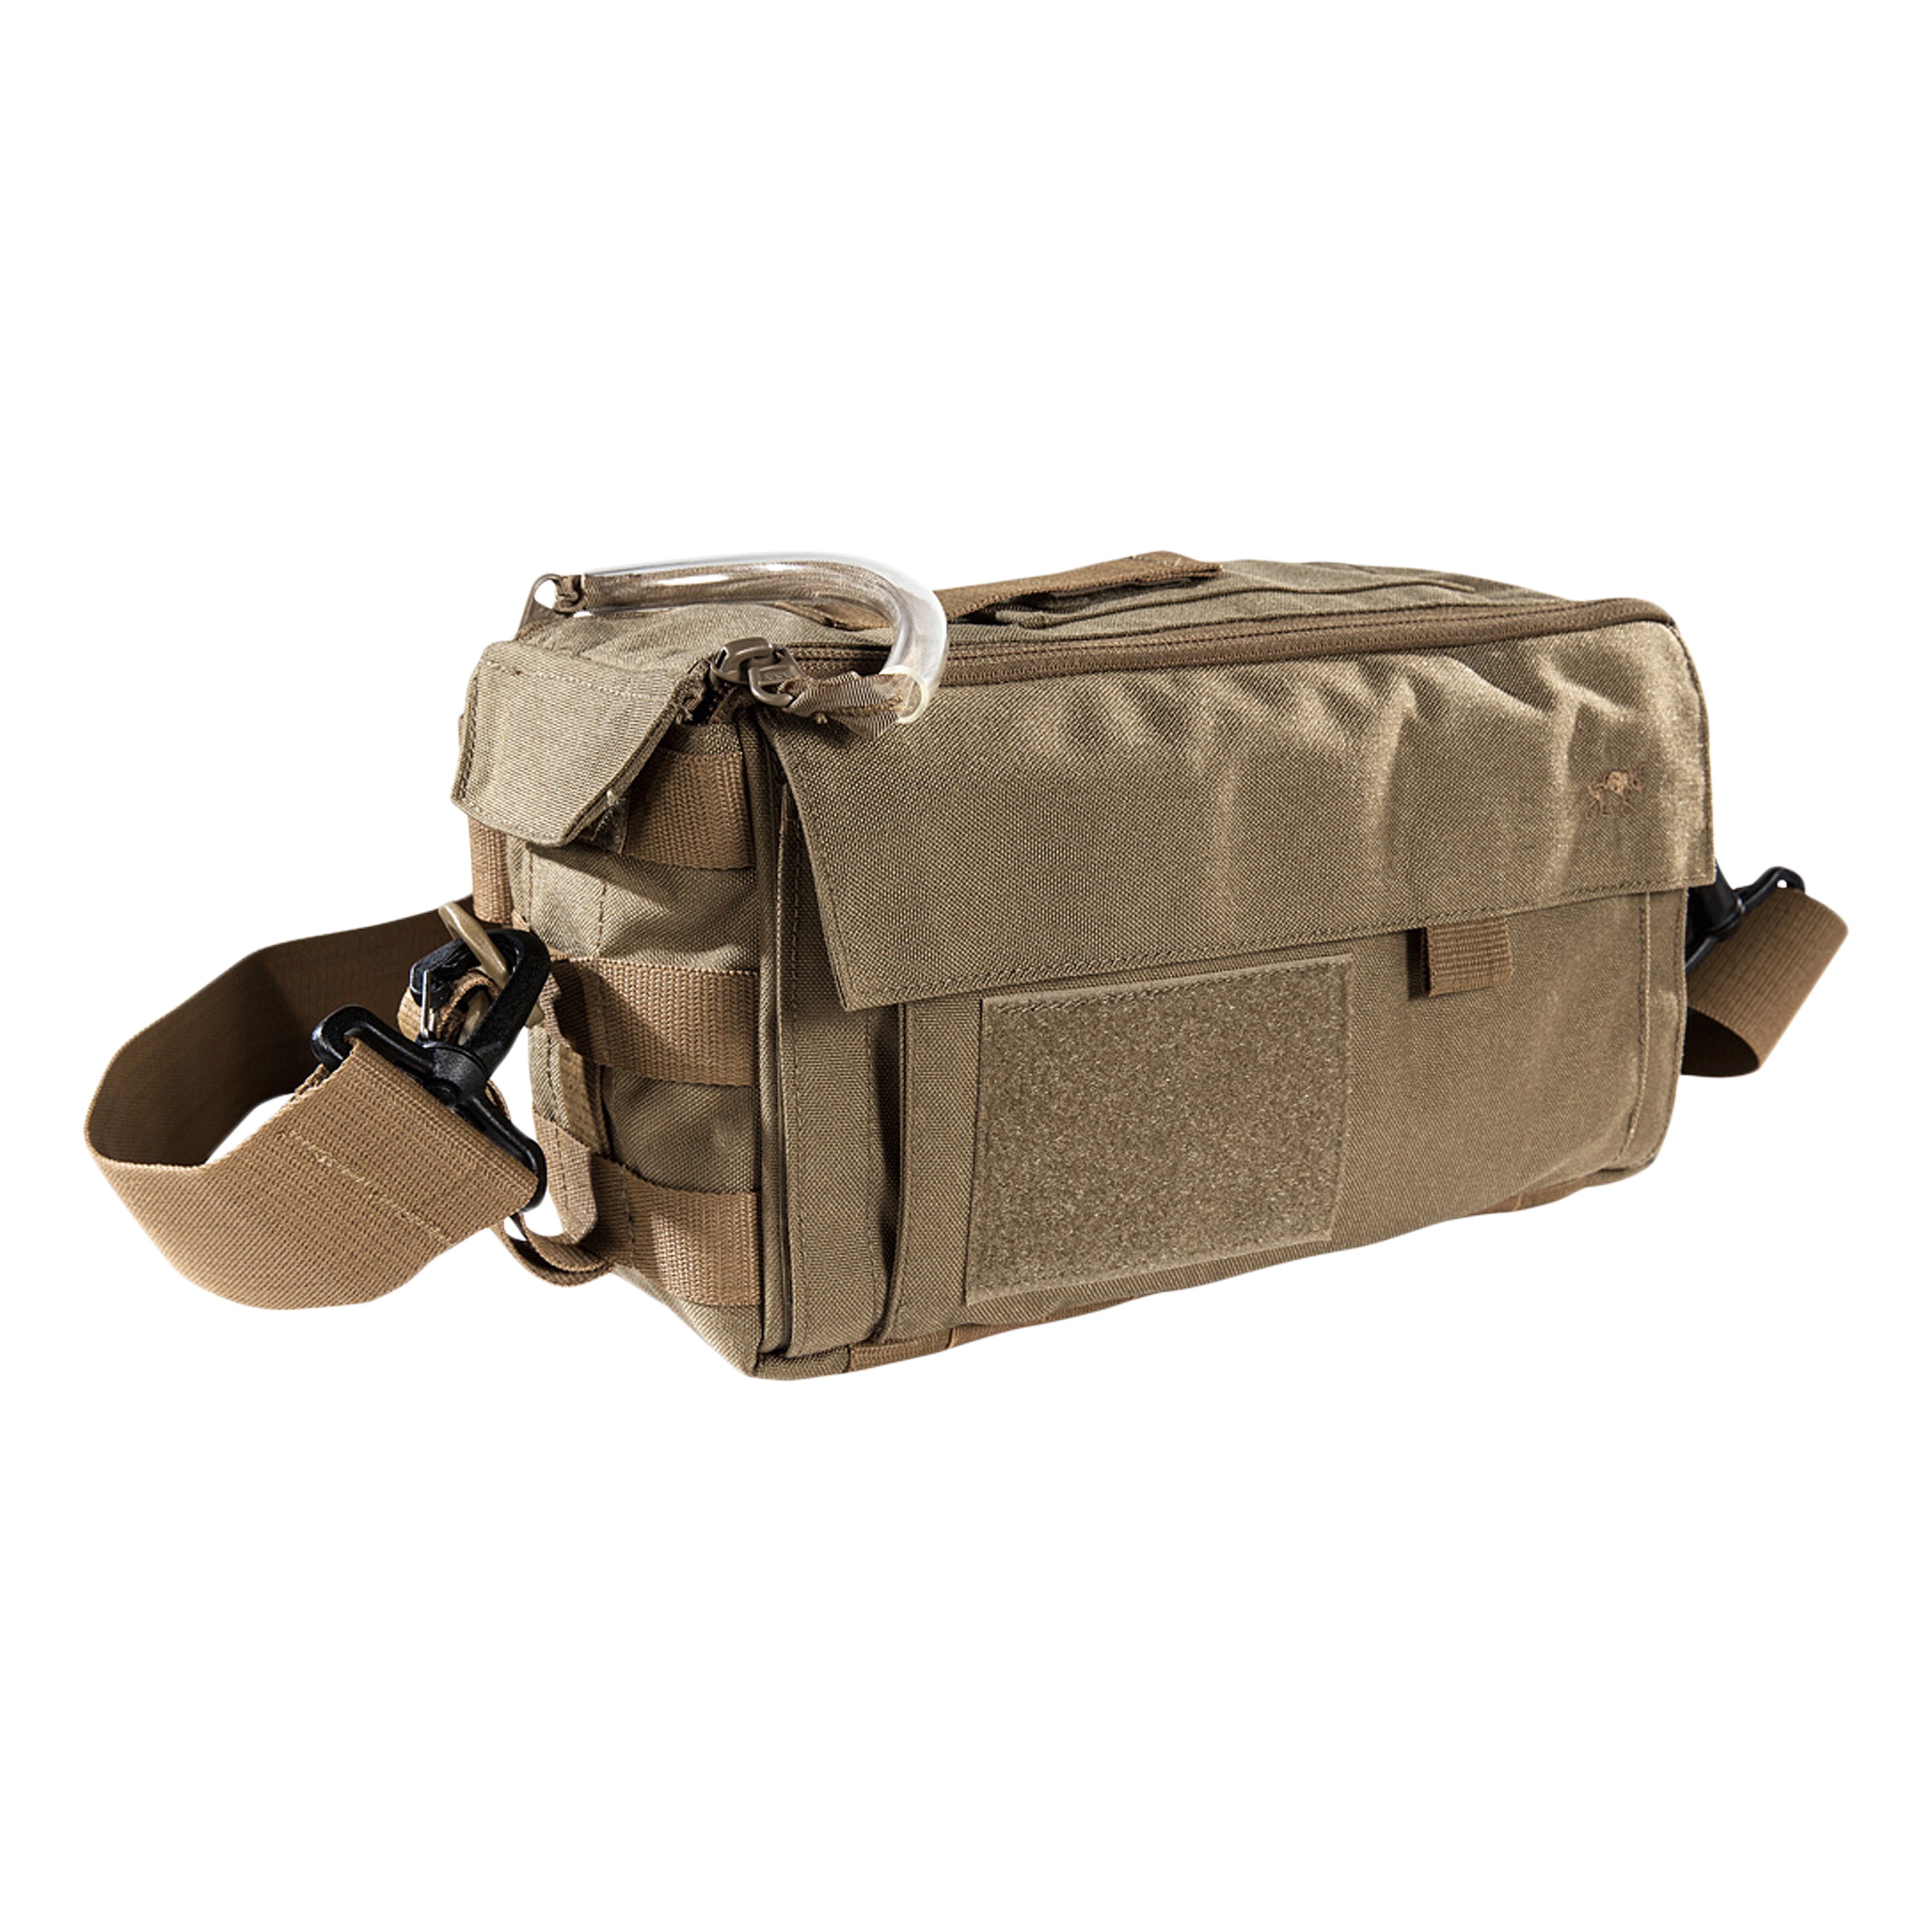 Purchase the Tasmanian Tiger Small Medic Pack MKII coyote by ASM